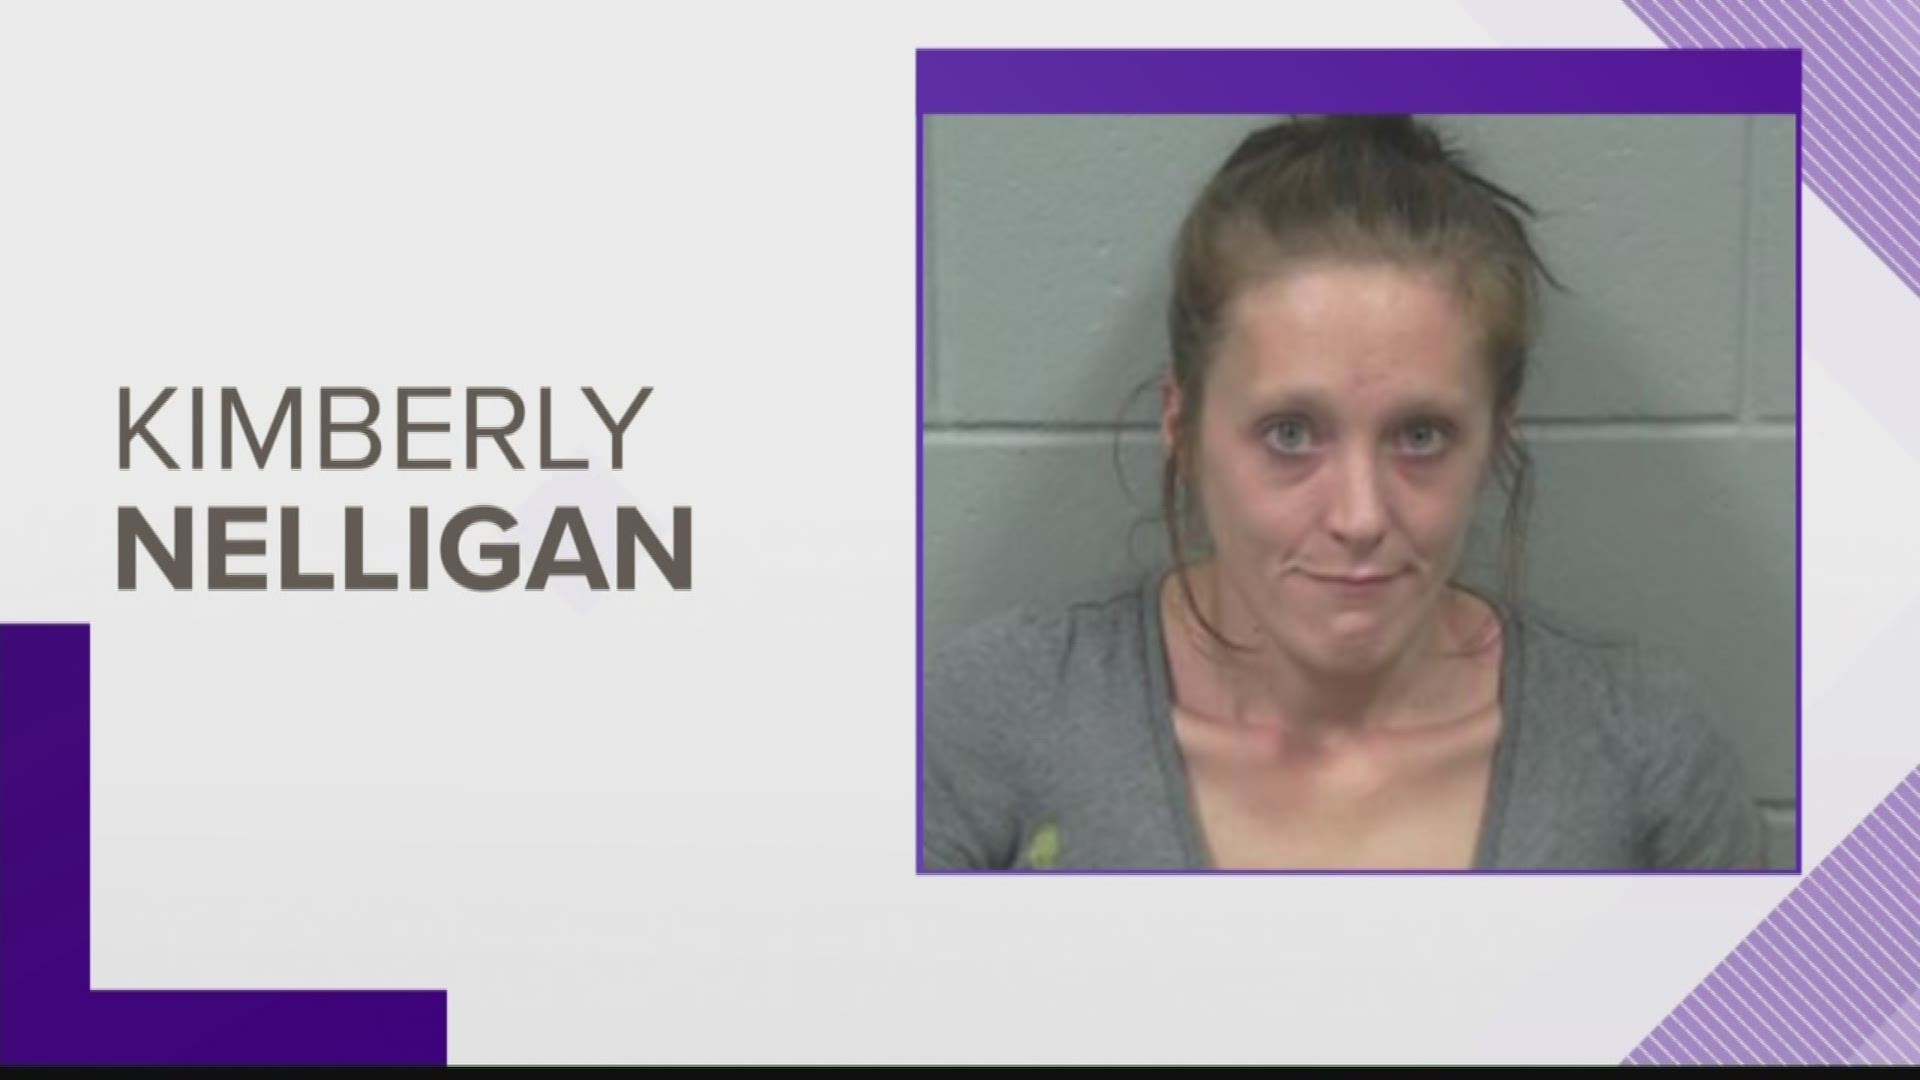 A woman from Bangor is being charged with the death of a 1-year-old child who died in Bangor last October of an overdose of fentanyl.